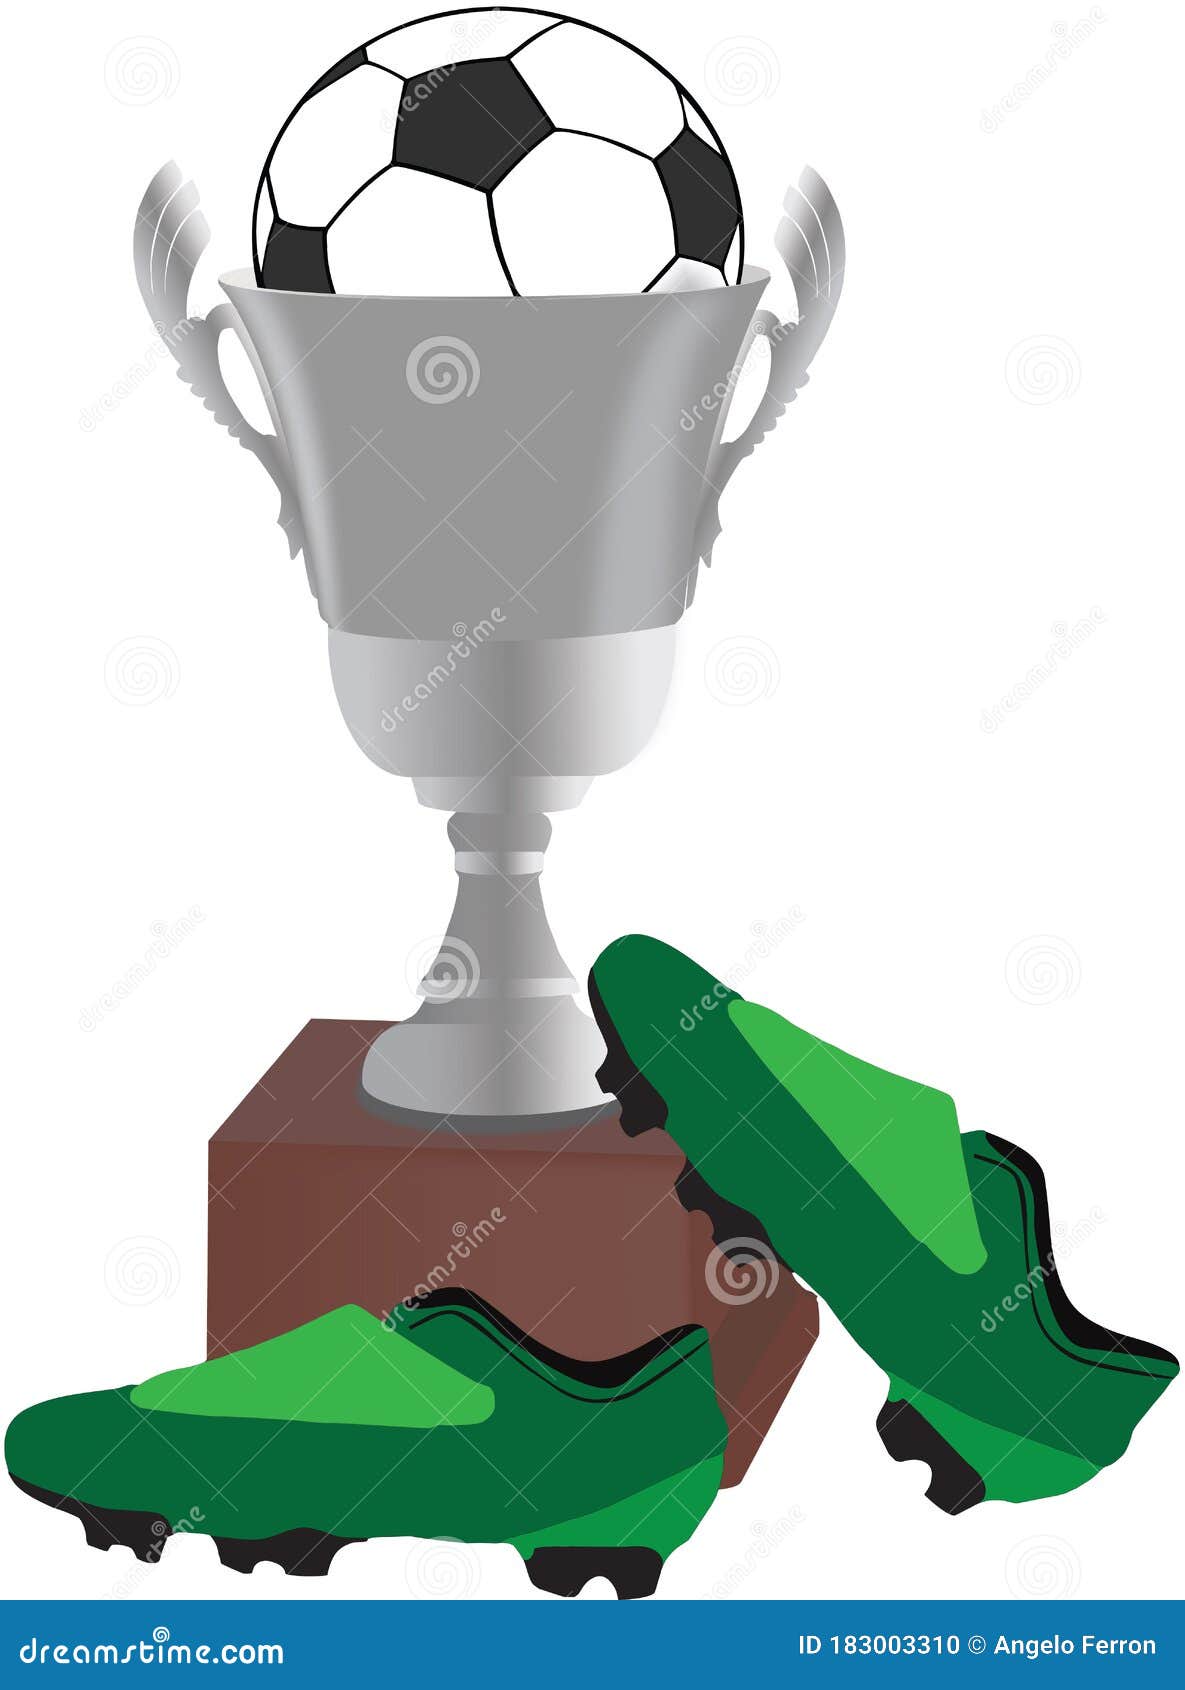 cup with football and green footballer`s shoes